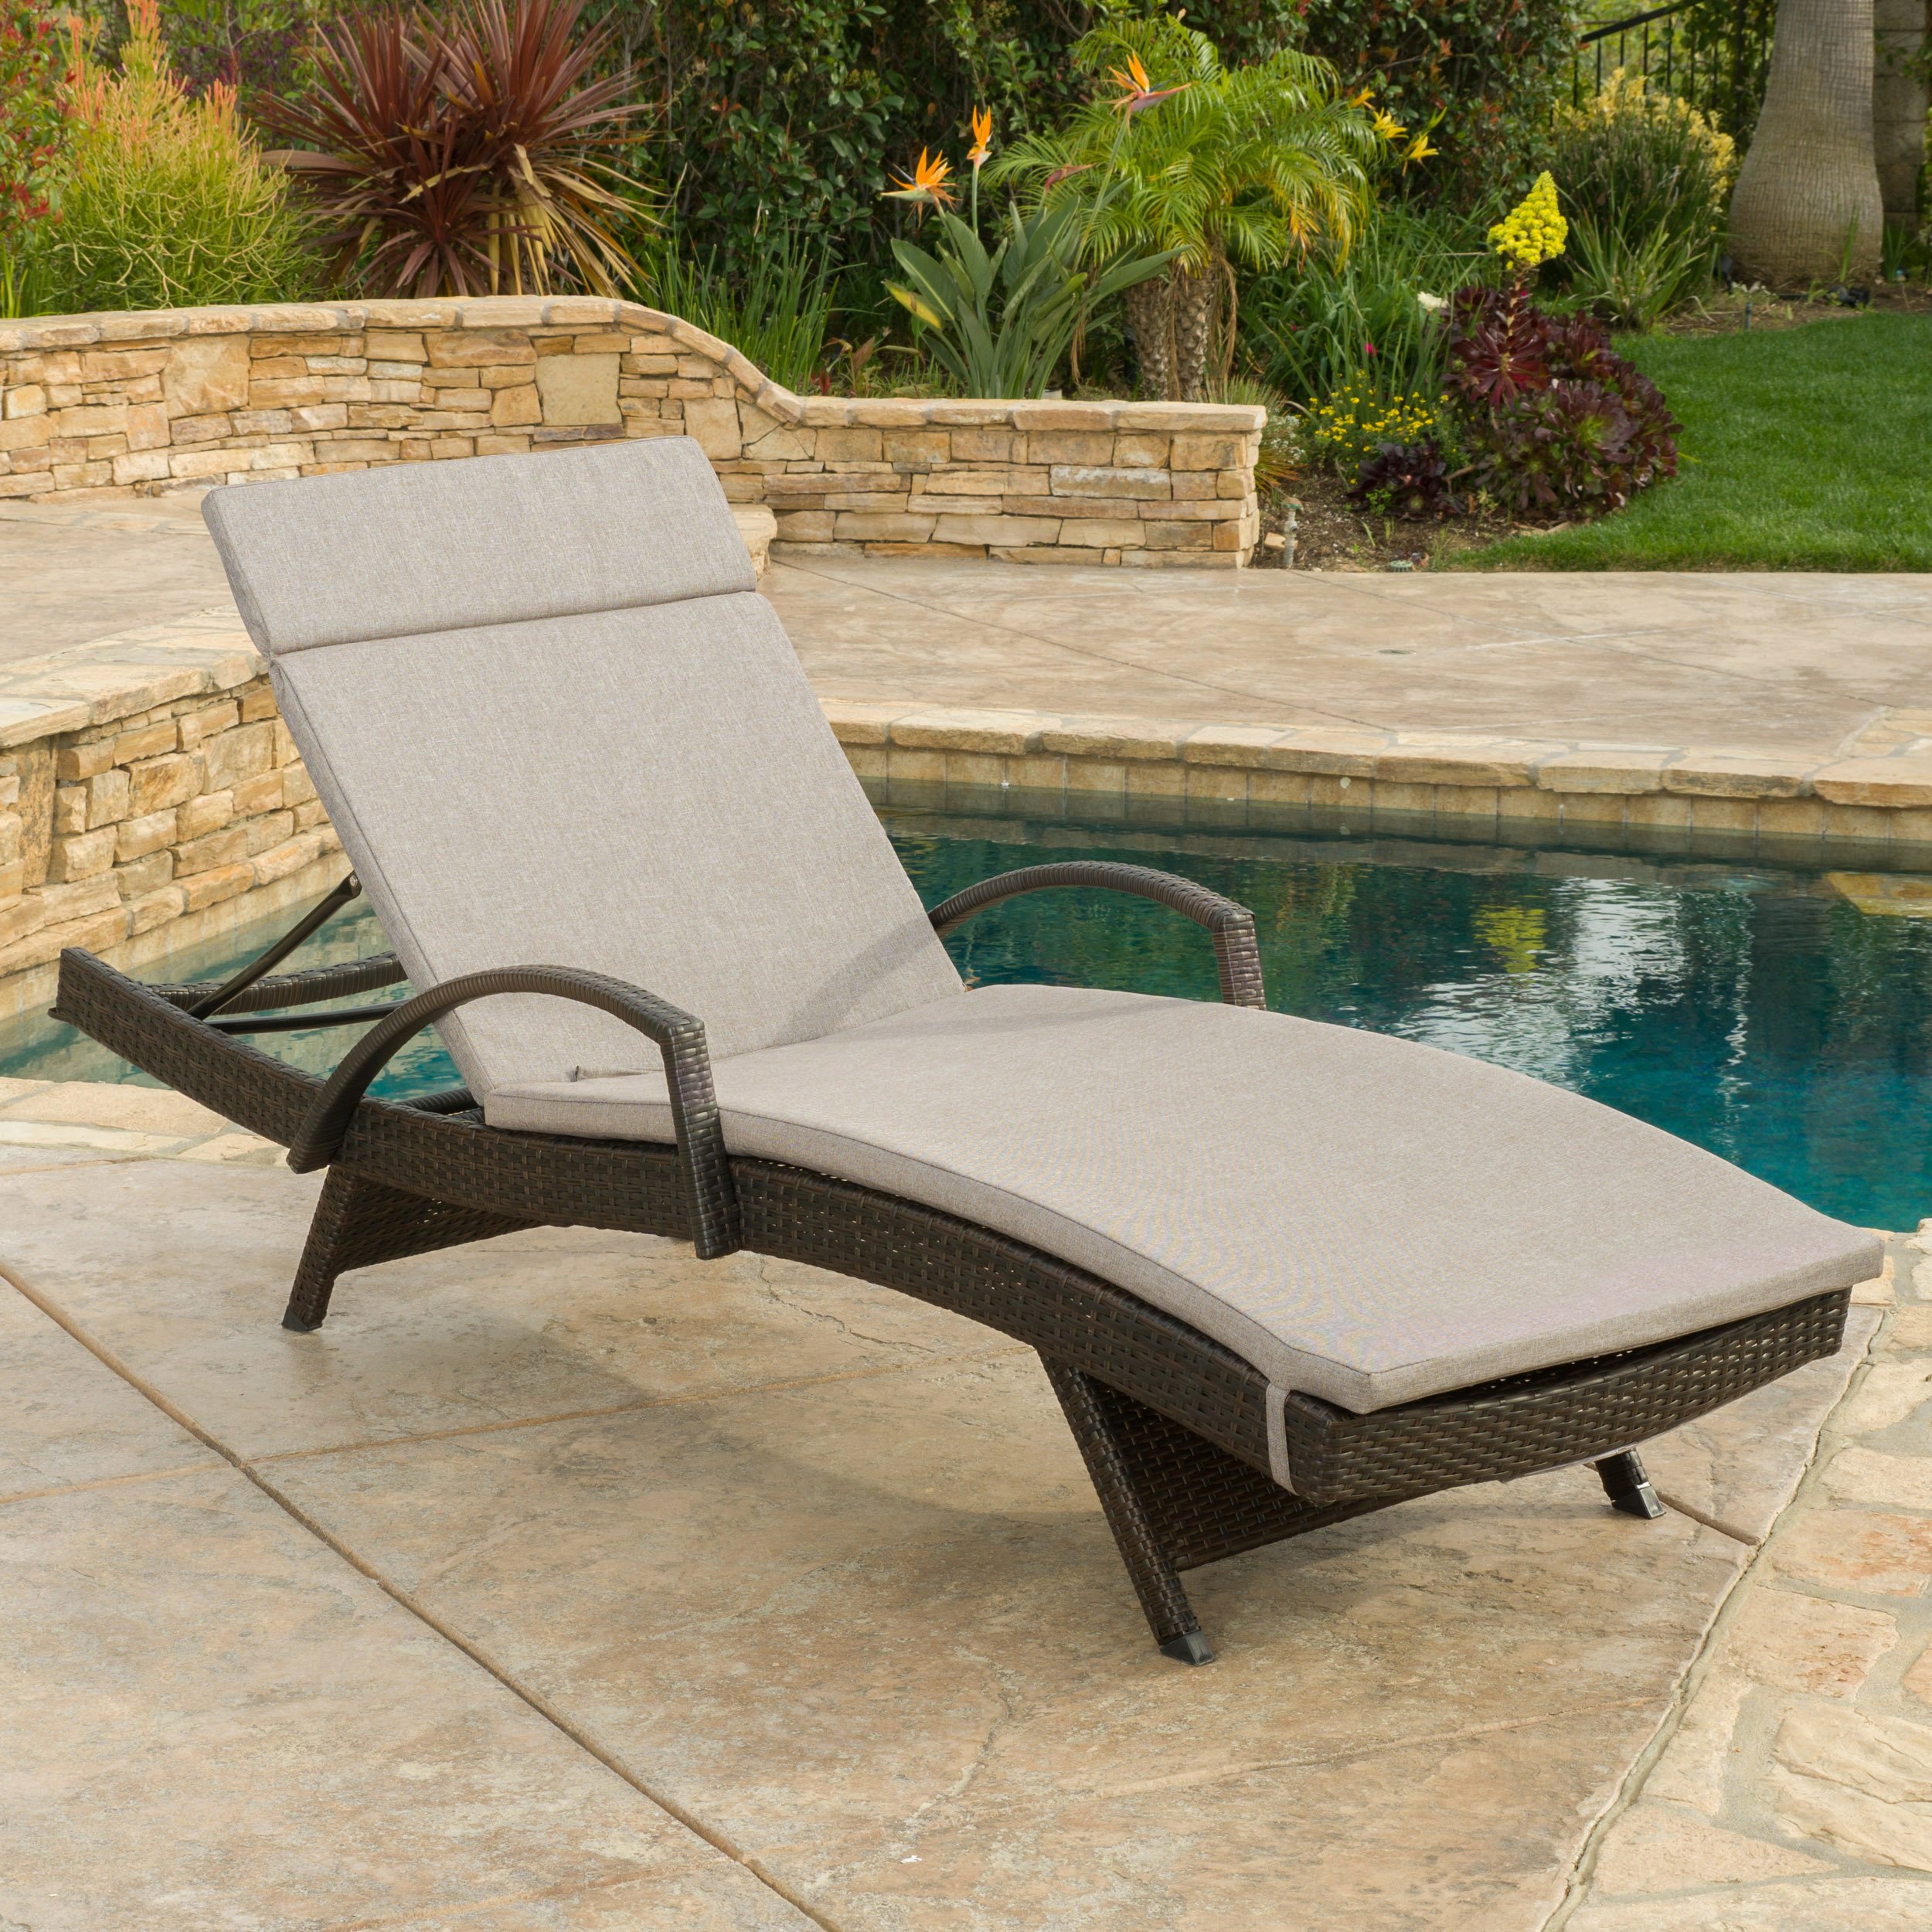 Lakeport Outdoor Adjustable Armed Chaise Lounge Chair With Cushion - Blue Cushion